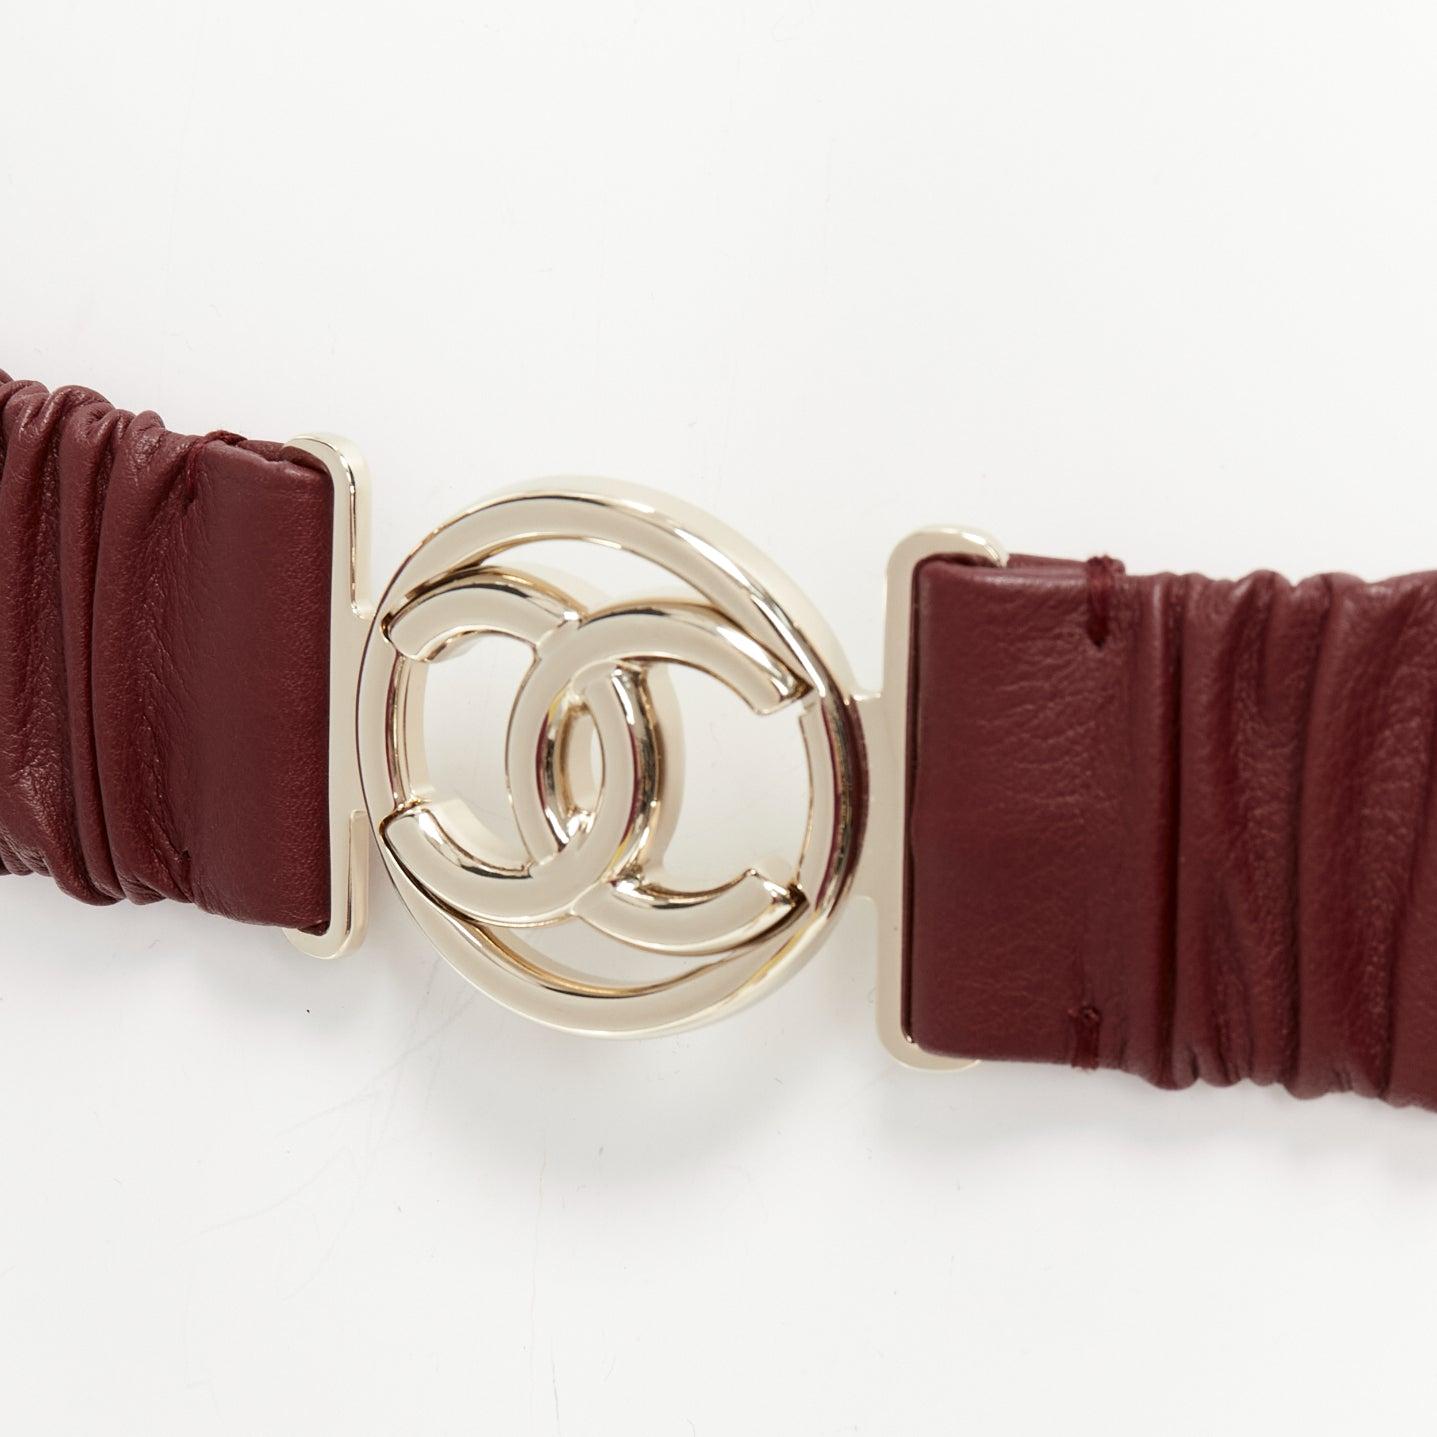 CHANEL B21K dark red ruched textured leather gold CC buckle elastic belt 70cm
Reference: AAWC/A00925
Brand: Chanel
Designer: Virginie Viard
Collection: B21K
Material: Leather, Metal
Color: Red, Gold
Pattern: Solid
Closure: Elasticated
Lining: Red